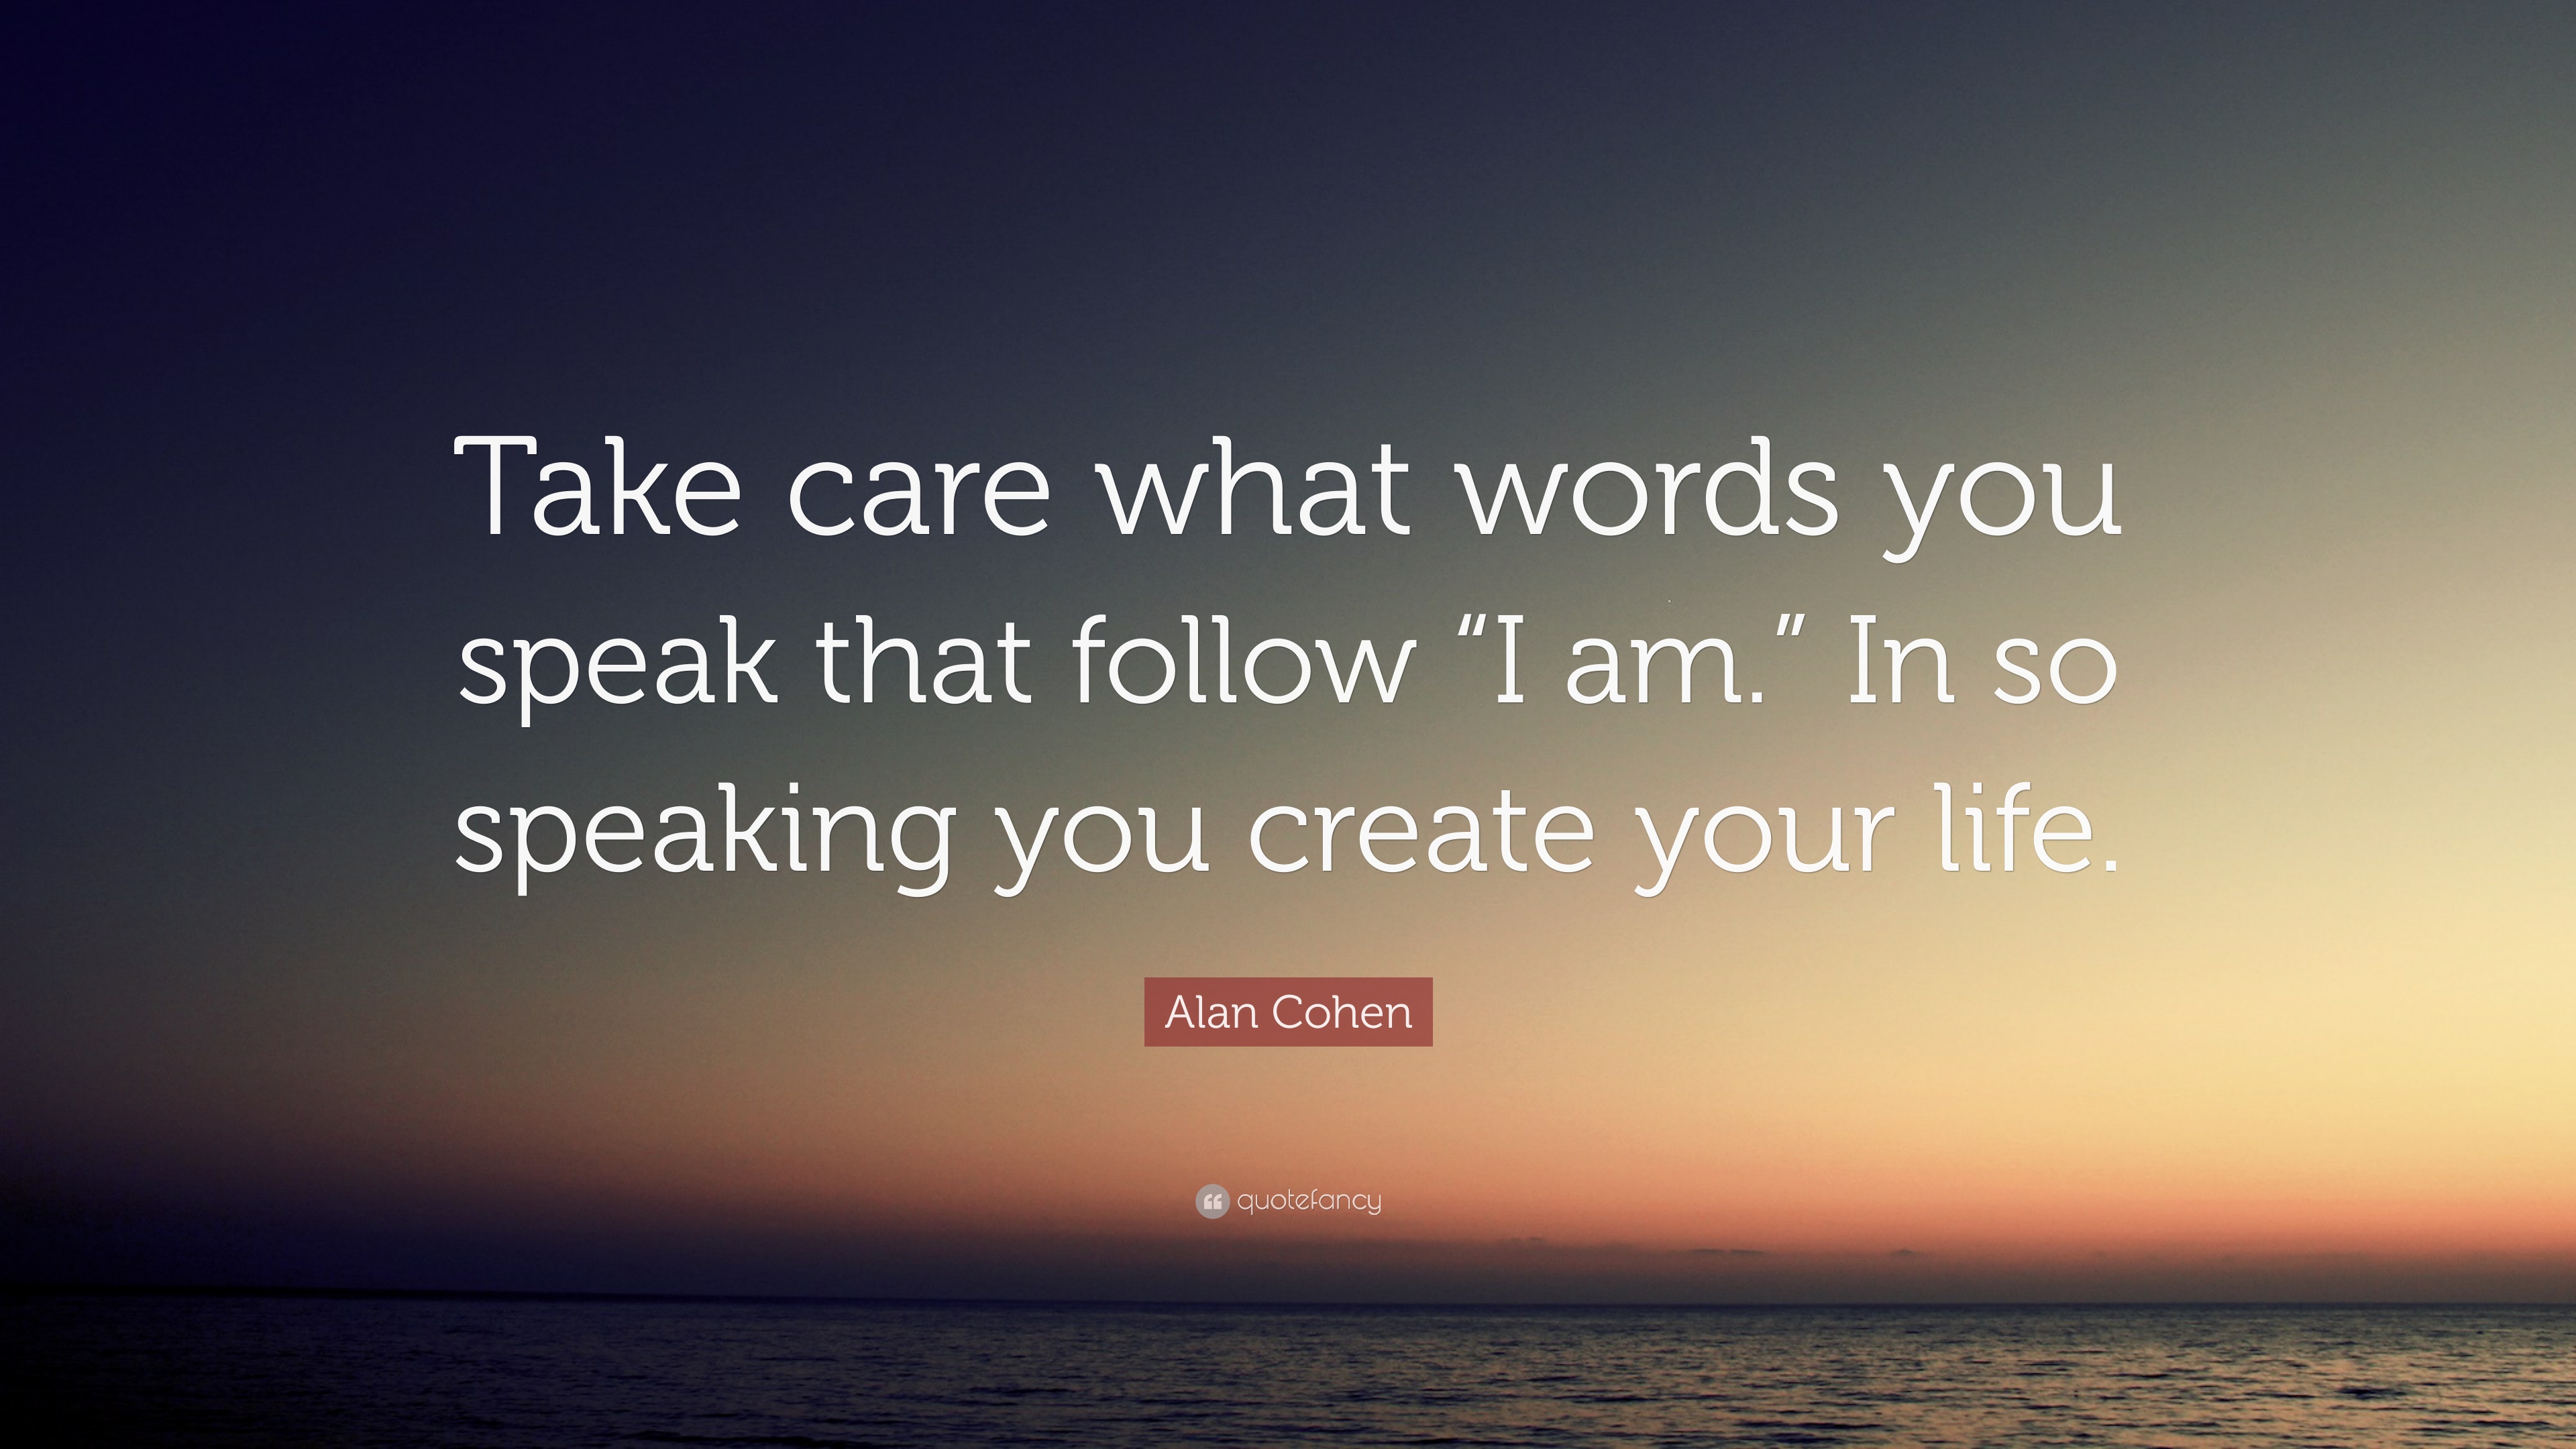 Alan Cohen Quote: “Take care what words you speak that follow “I am